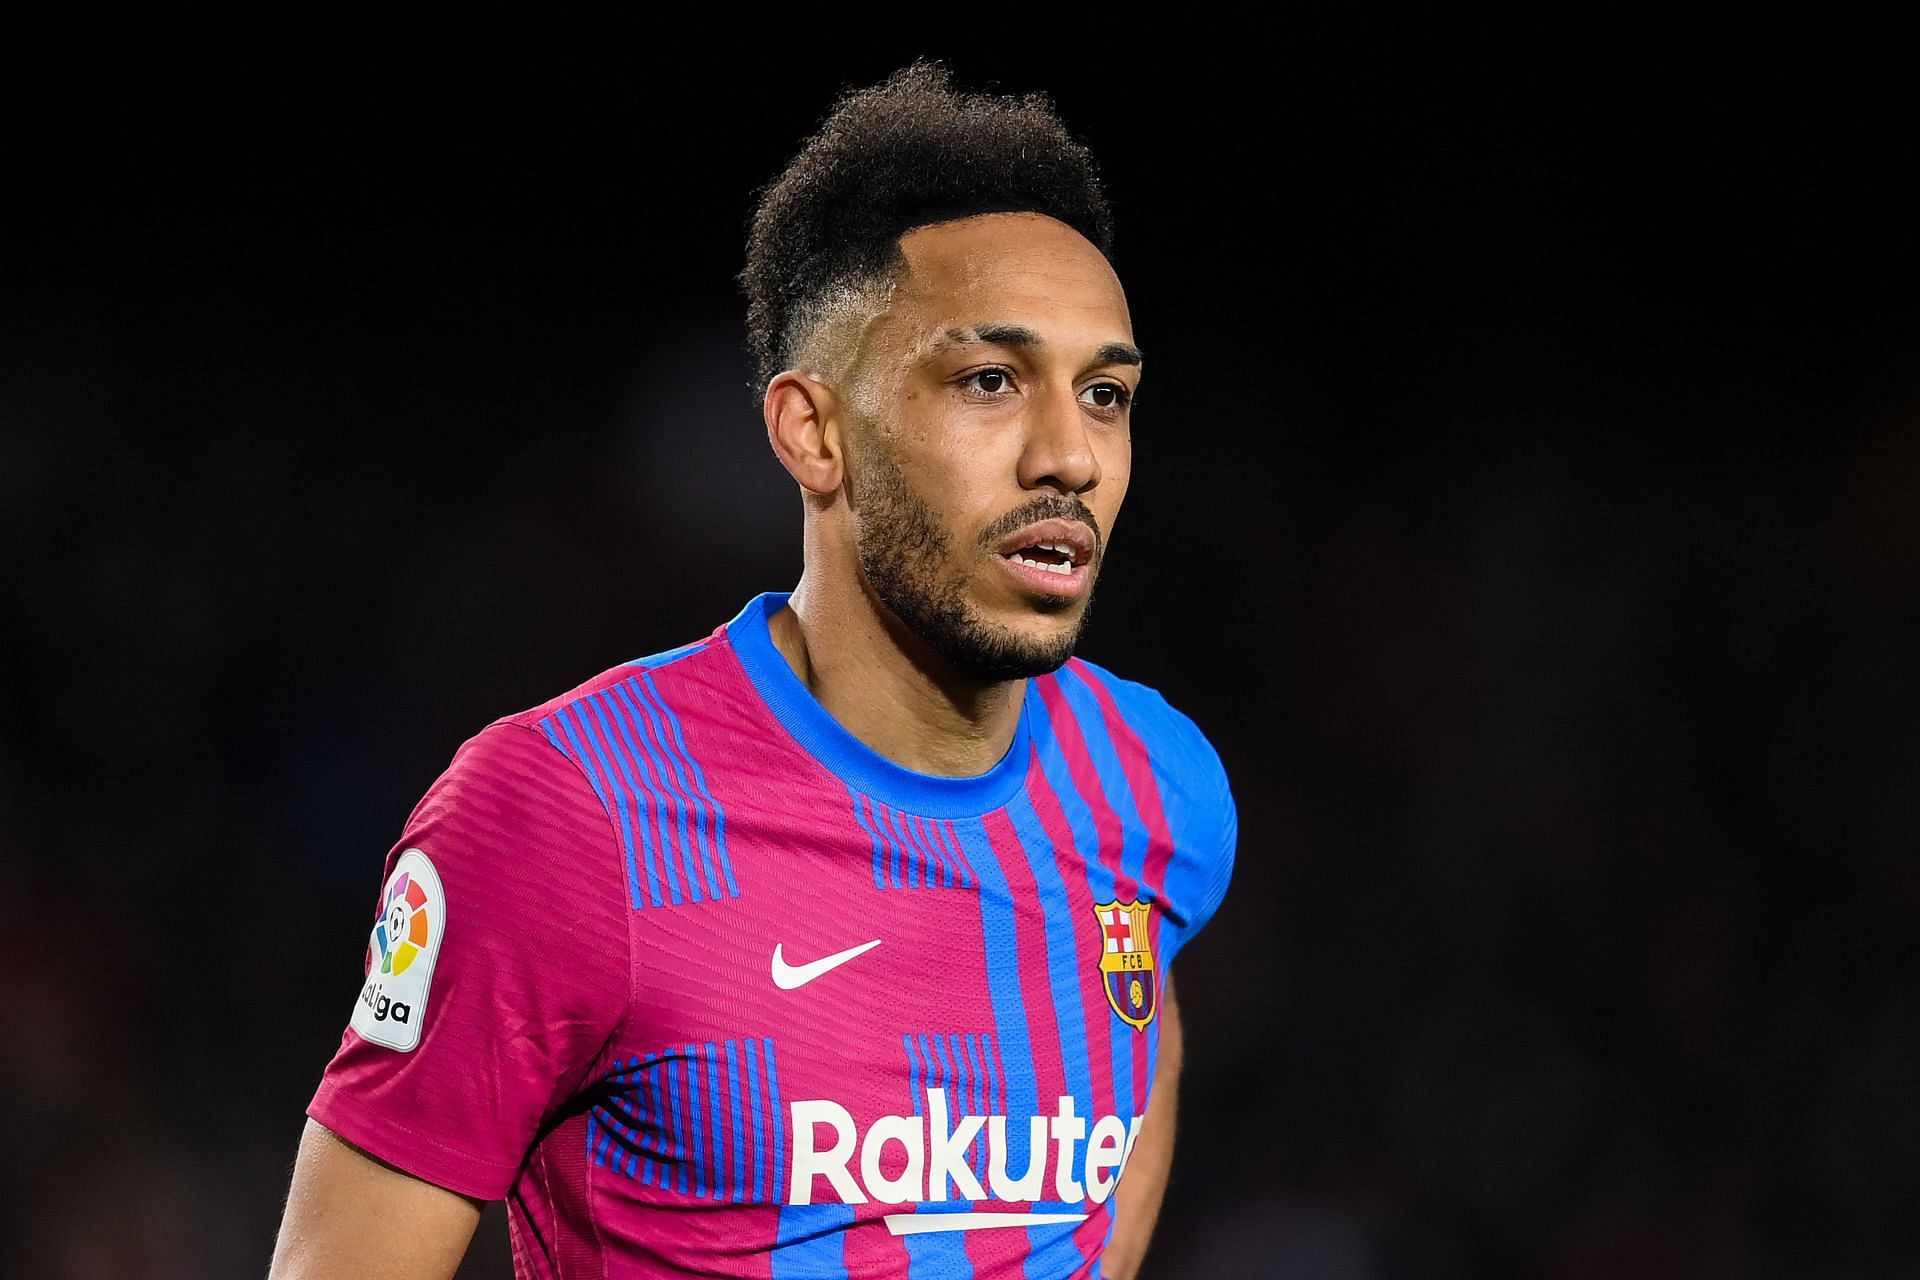 Aubameyang has been in good form for the Catalans